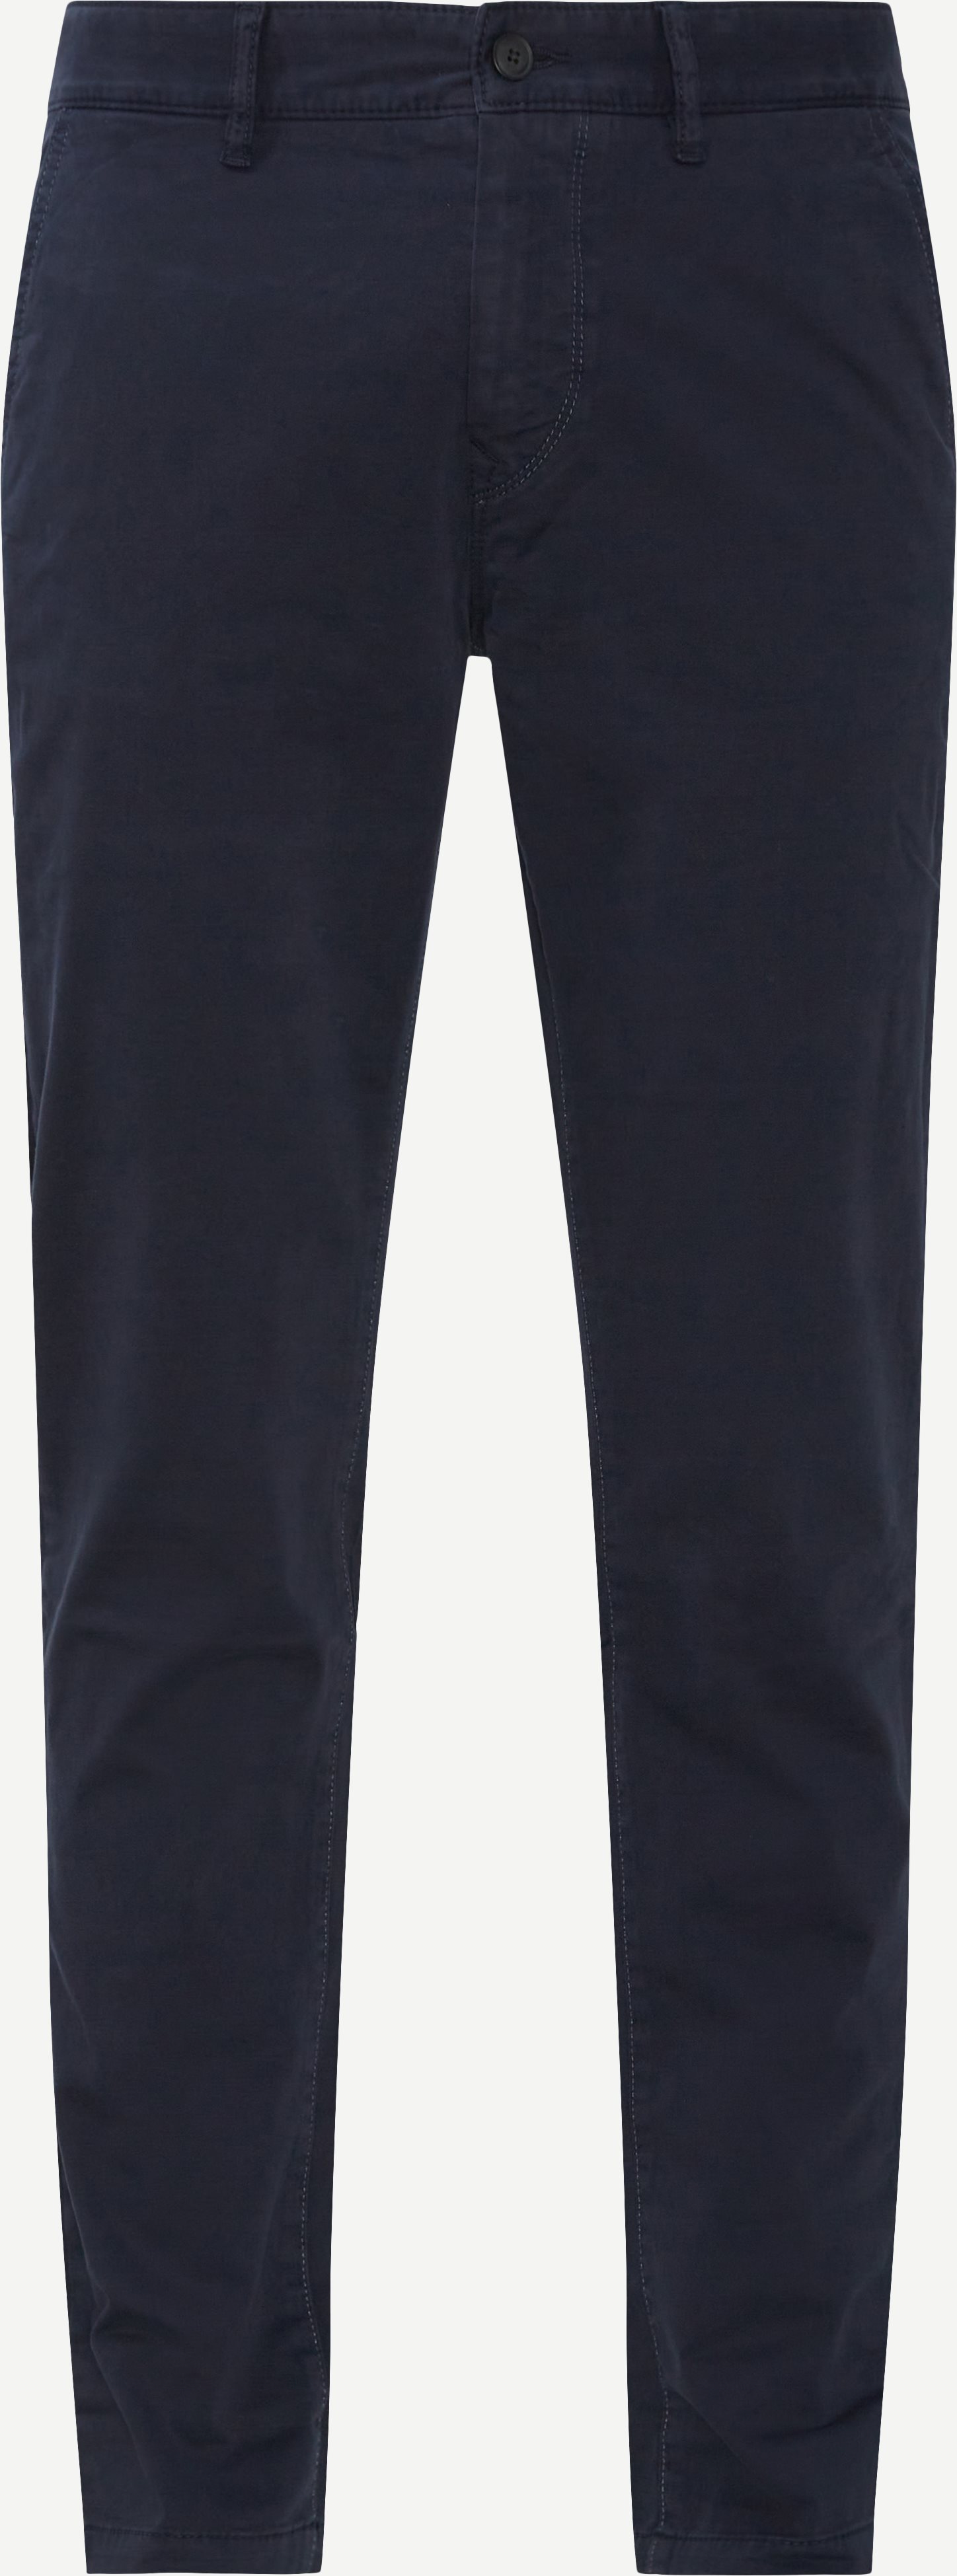 Schino Taber Chinos - Bukser - Tapered fit - Blå